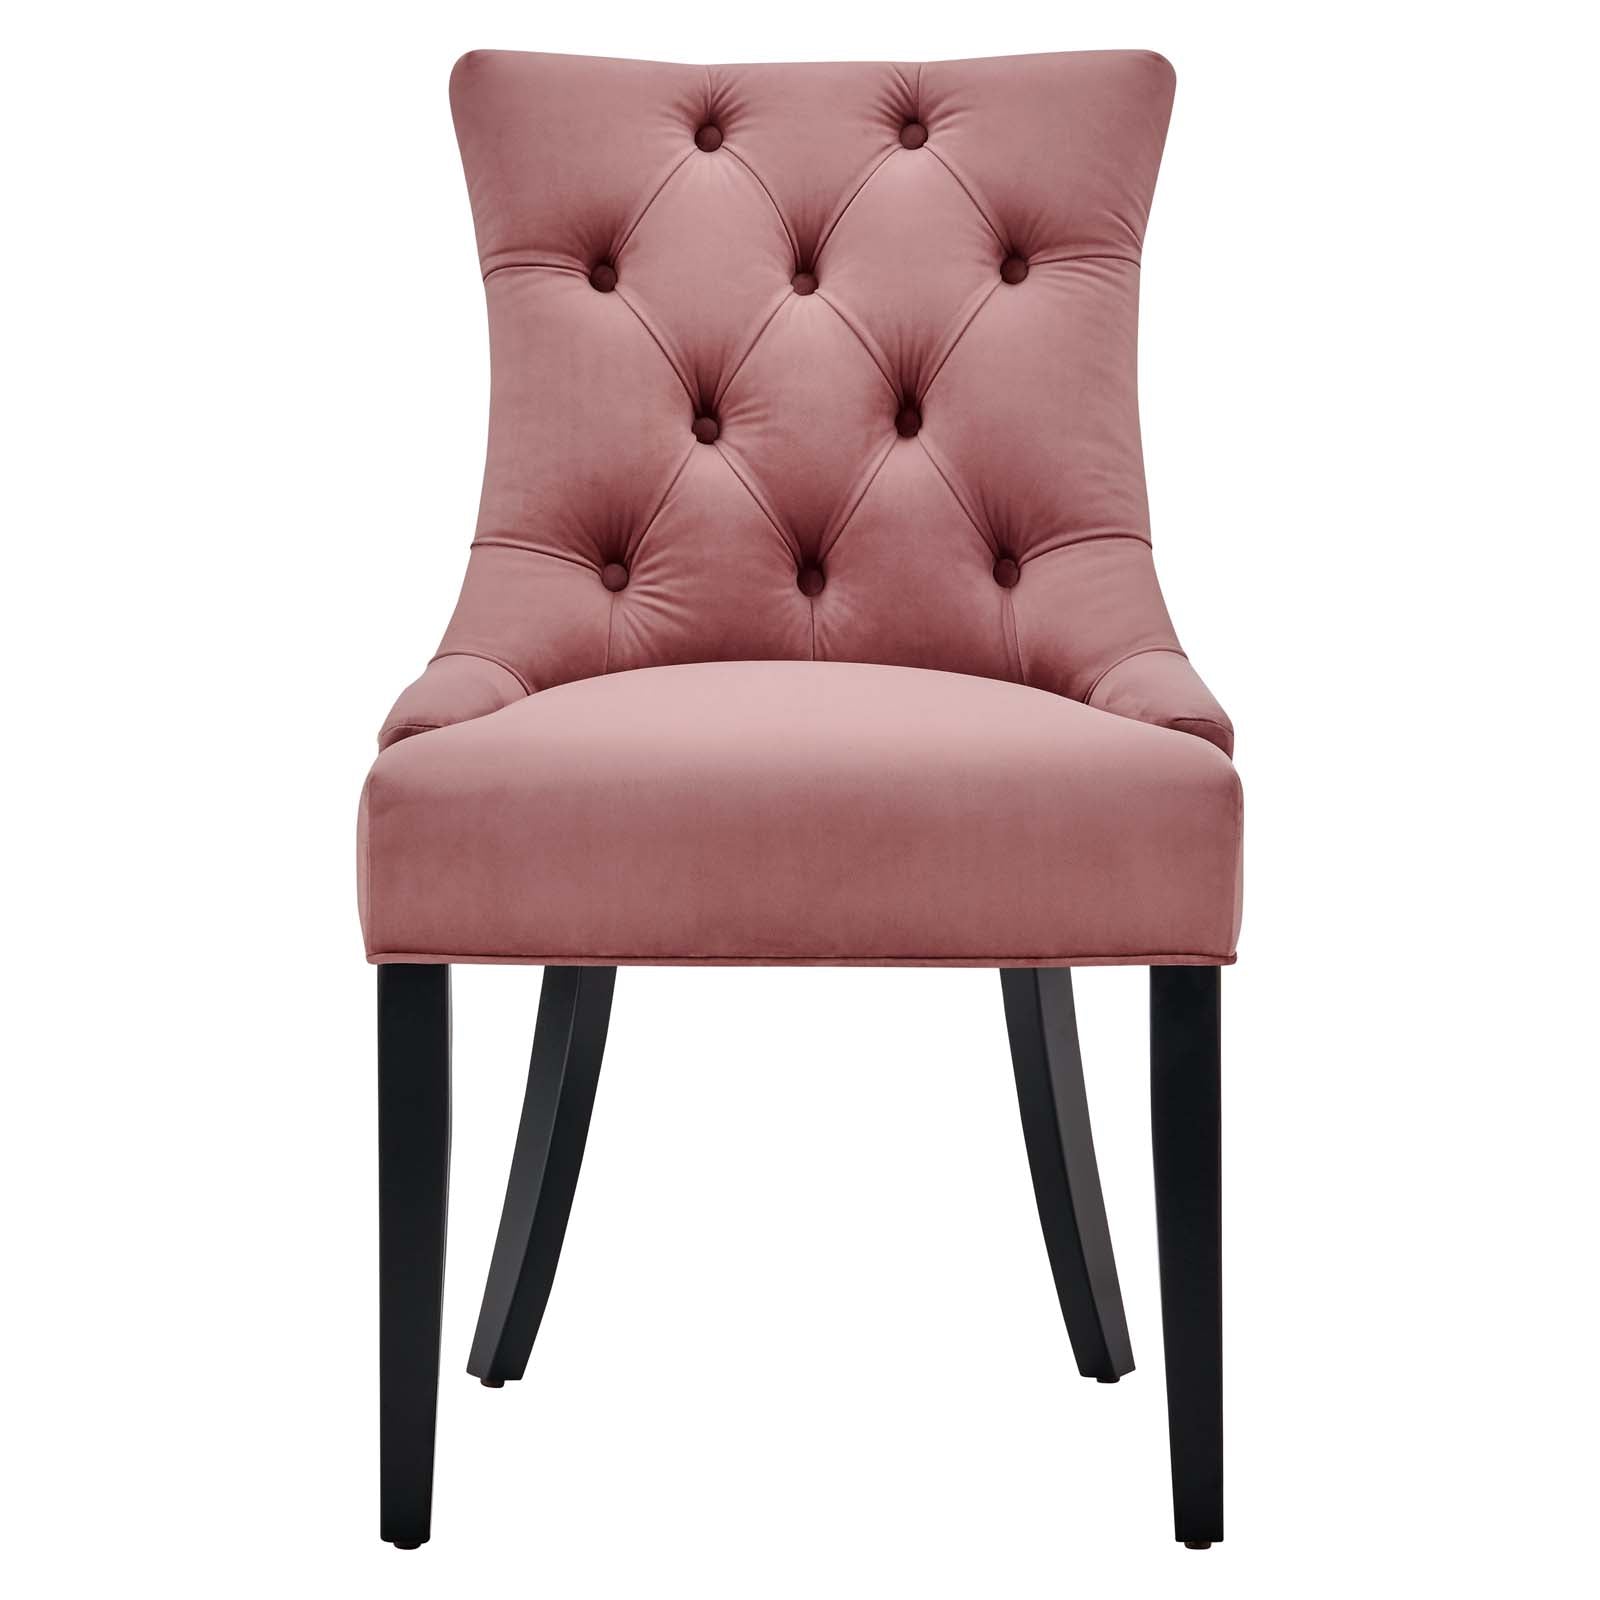 Modway Dining Chairs - Regent Tufted Performance Velvet Dining Side Chairs - ( Set of 2 ) Dusty Rose